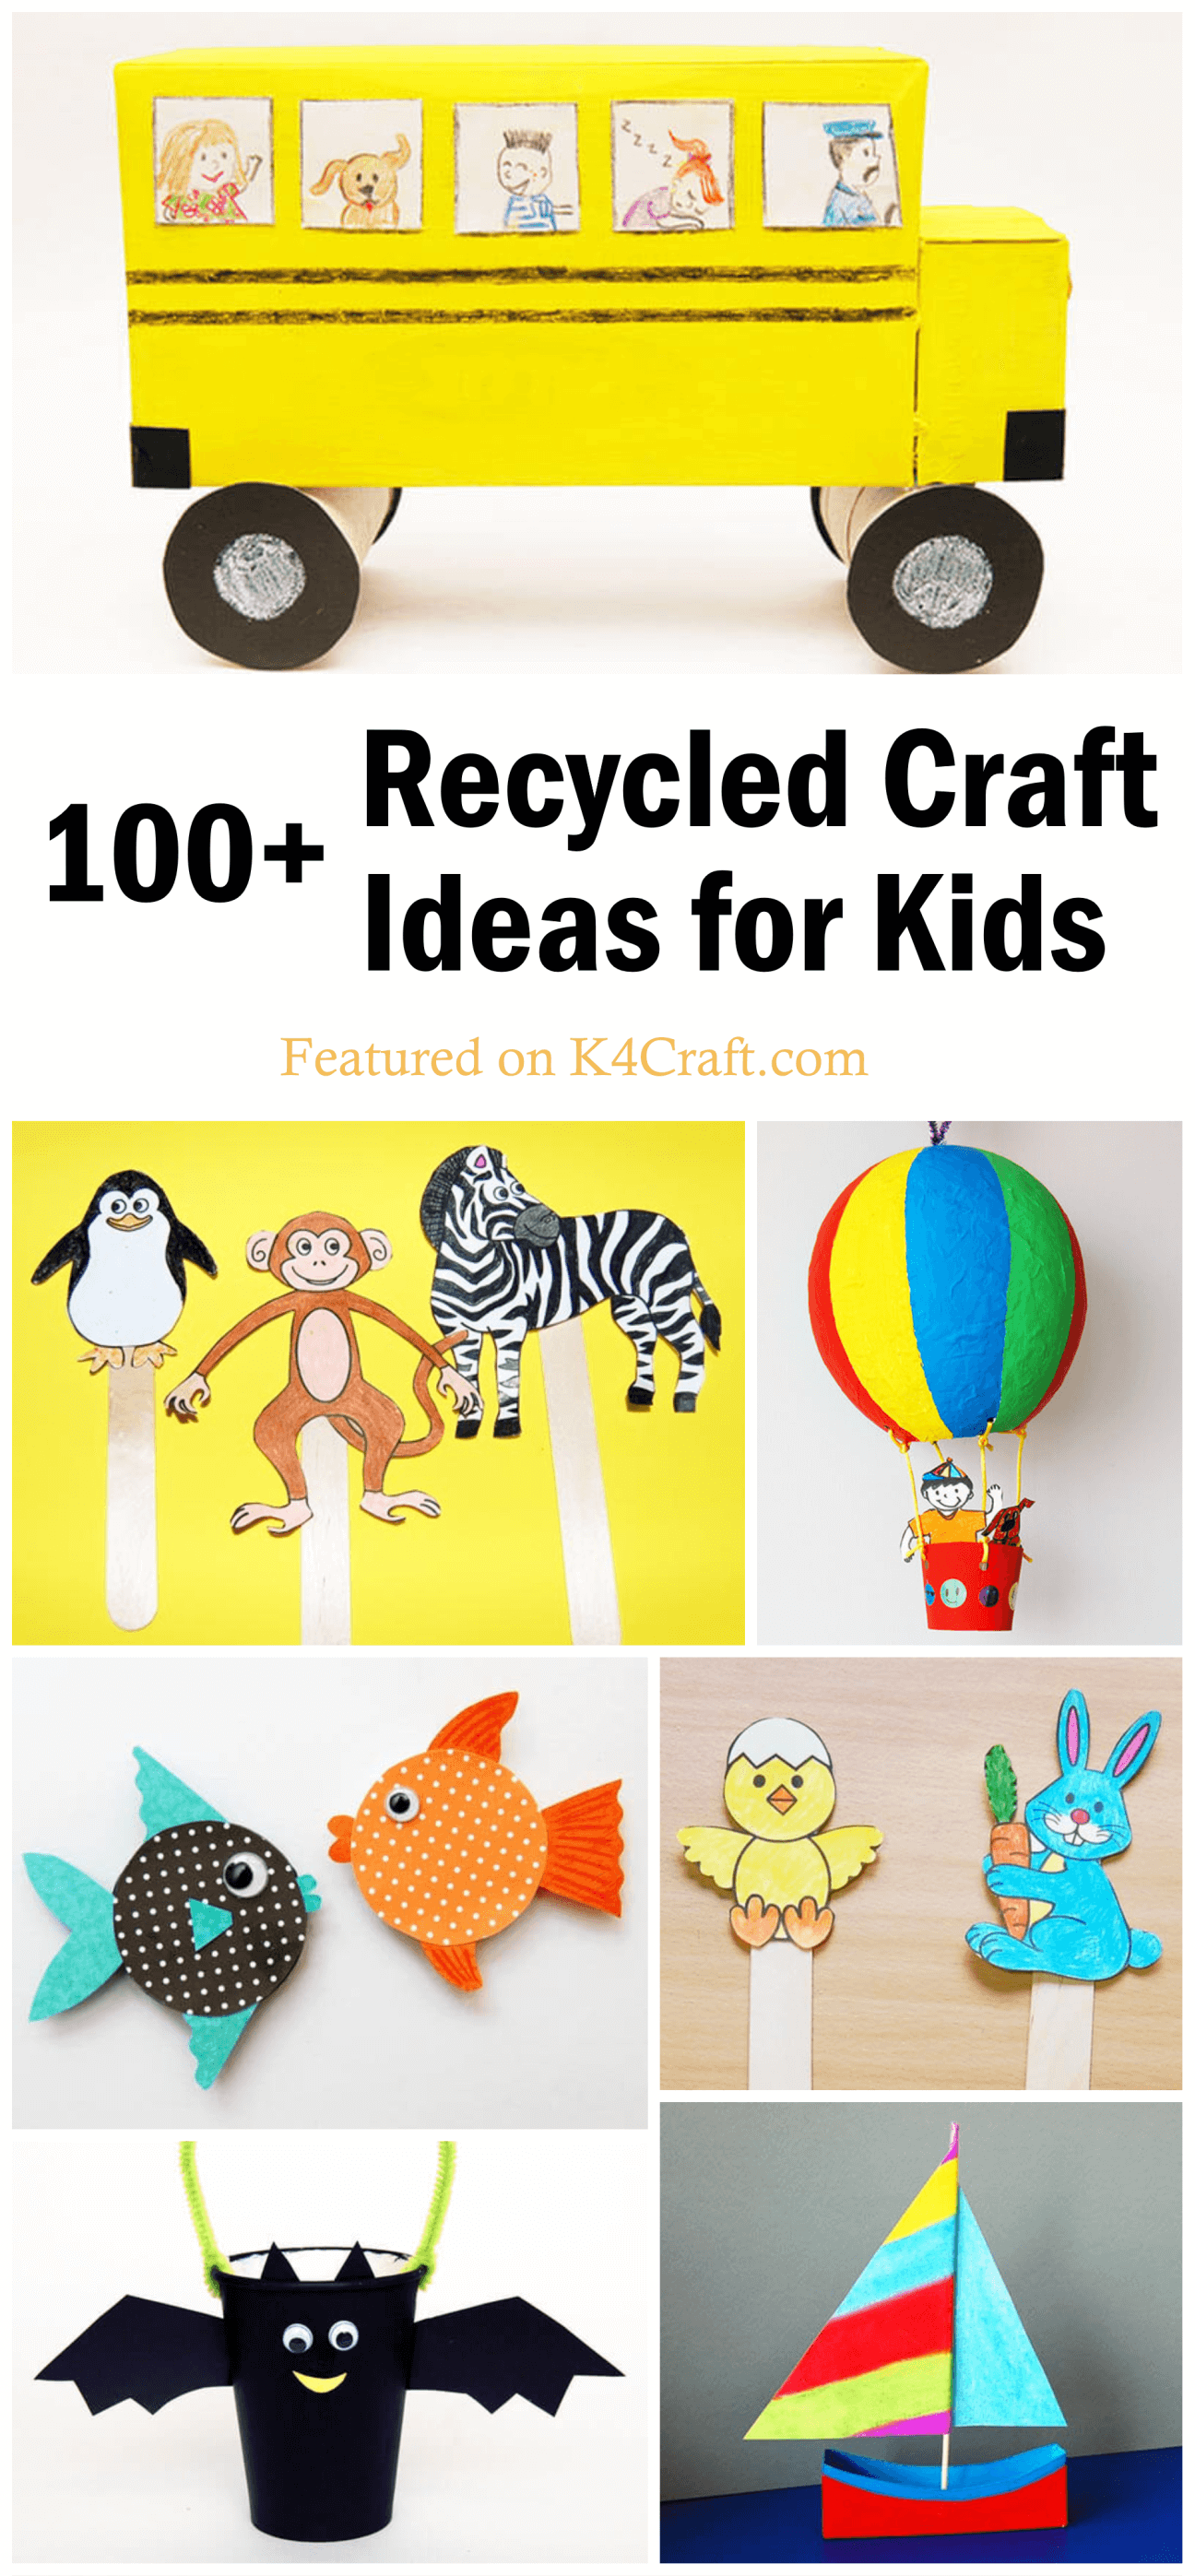 100+ Easy Recycled Craft Ideas for Kids • K4 Craft